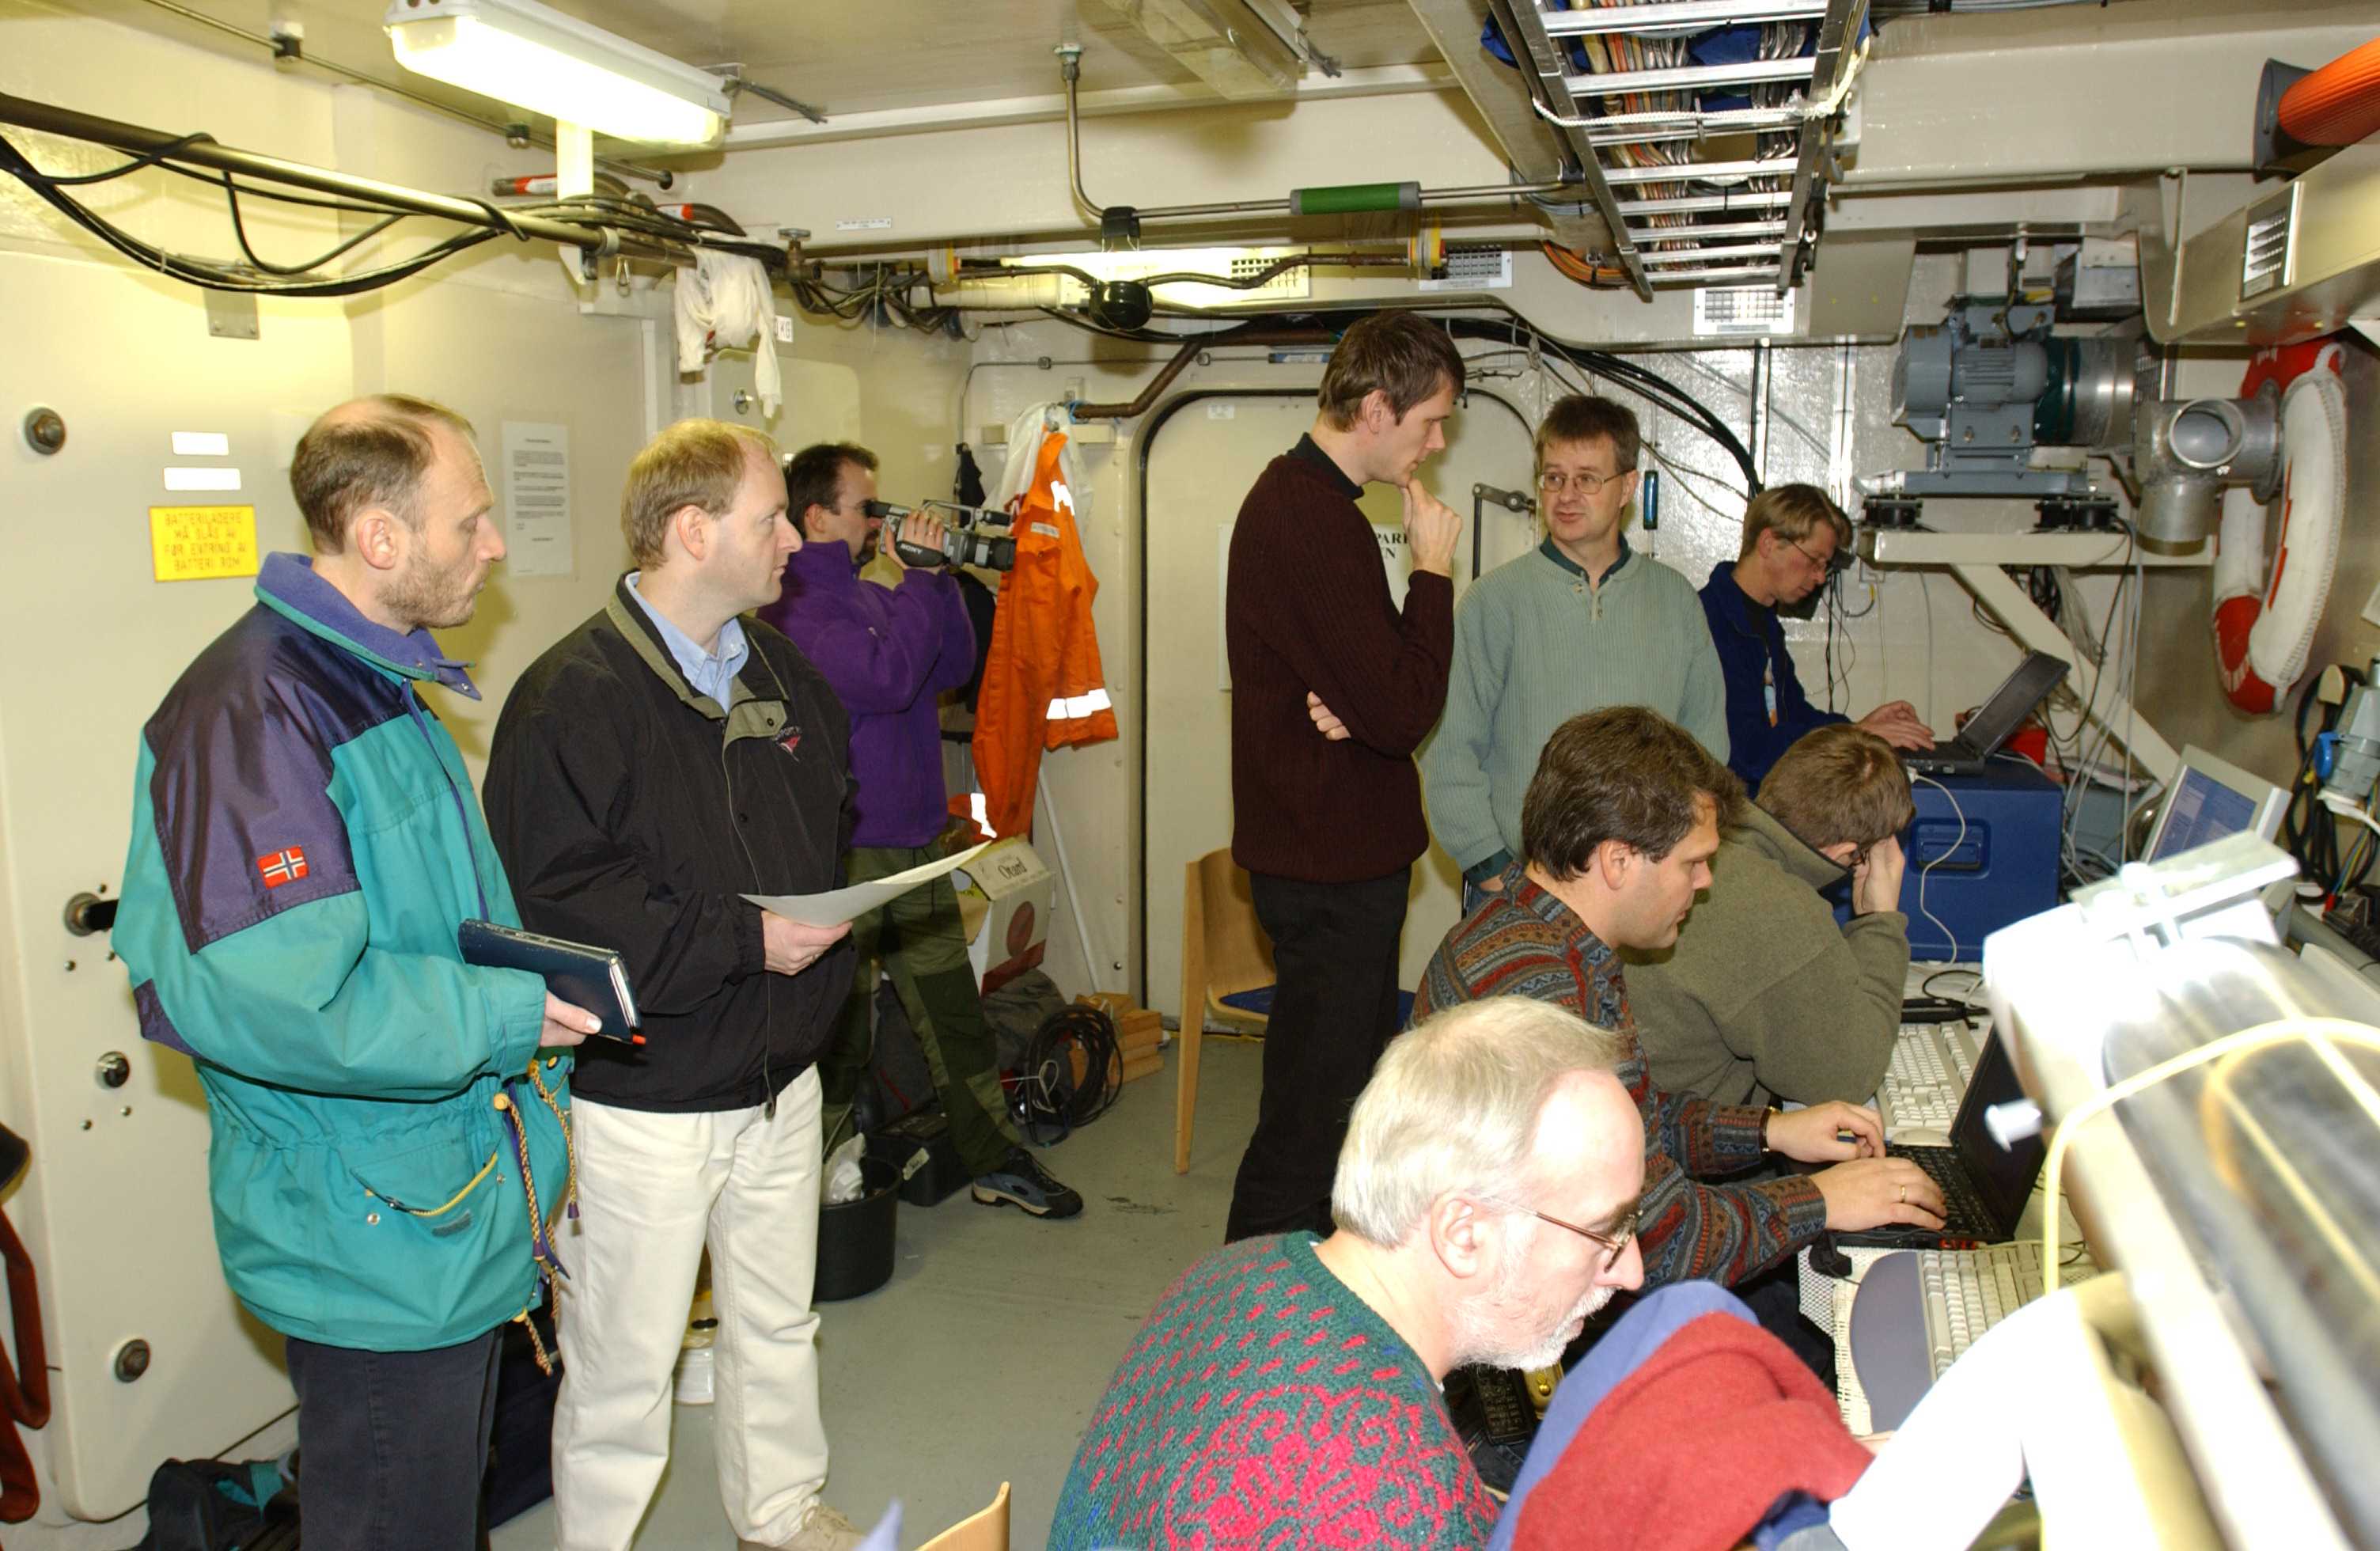 In the ROV hangar onboard the Royal Norwegian Navy mine hunter HNoMS Karmoy during the first full-scale Mine Counter Measure demo in December 2001. Nils Størkersen and Per Espen Hagen standing in the back, on left. Other people pictured are Jan Olav Langseth, Bjørn Hugsted, Petter Lågstad, Bjørn Jalving, Øivind Midtgaard, Jon Kristensen (standing in with pale green top and glasses) and Magne Mandt.